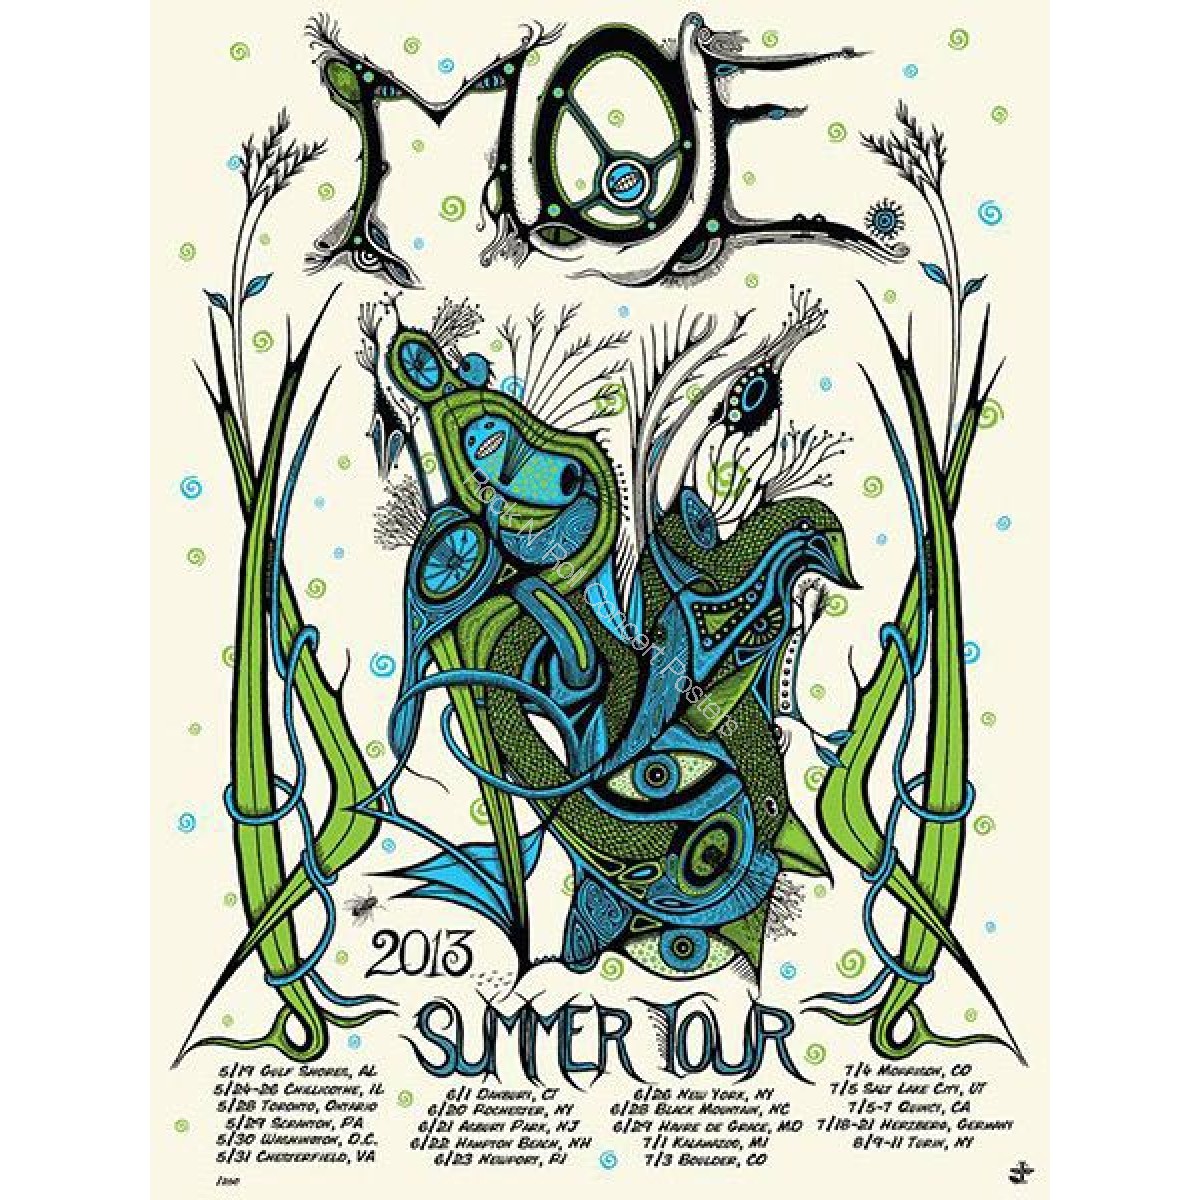 Moe. Summer Tour 2013 Poster S/N Screen Print Edition of 310